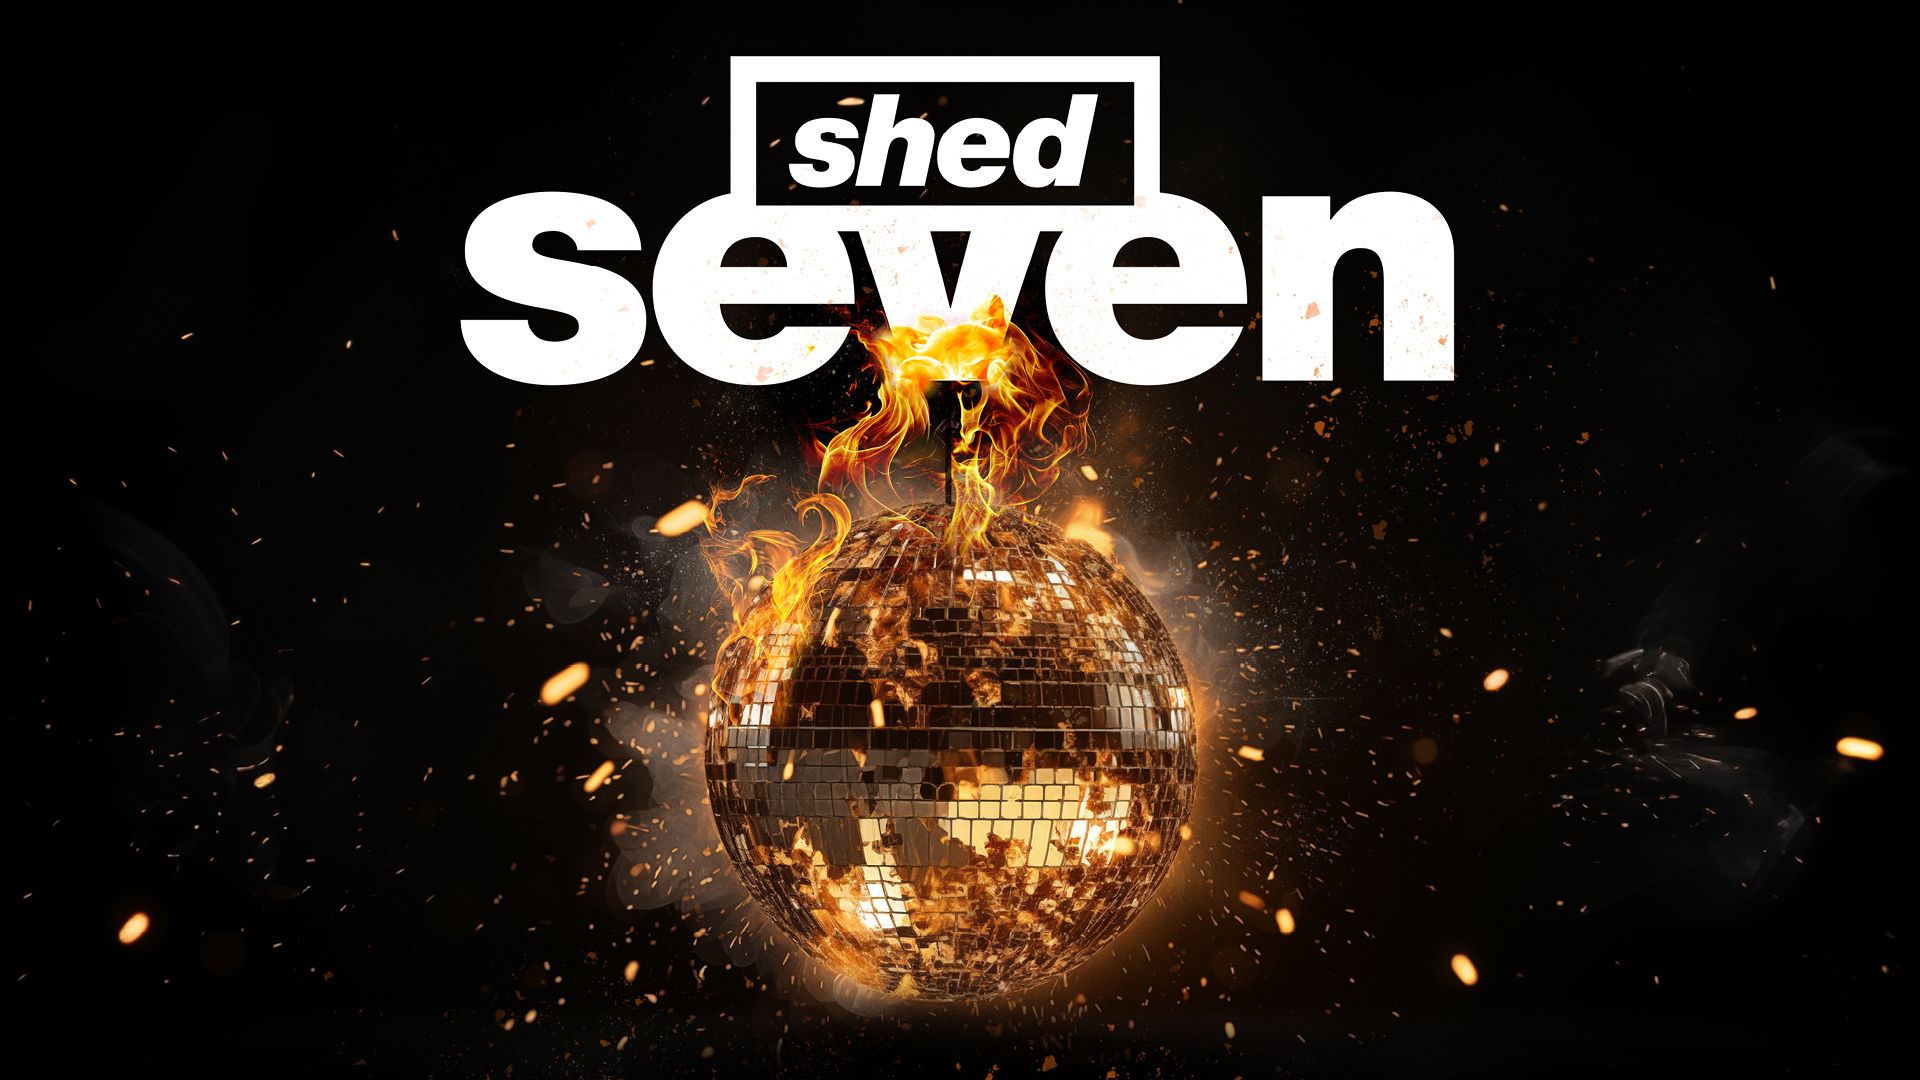 Shed Seven logo above a mirror ball, which is on fire 